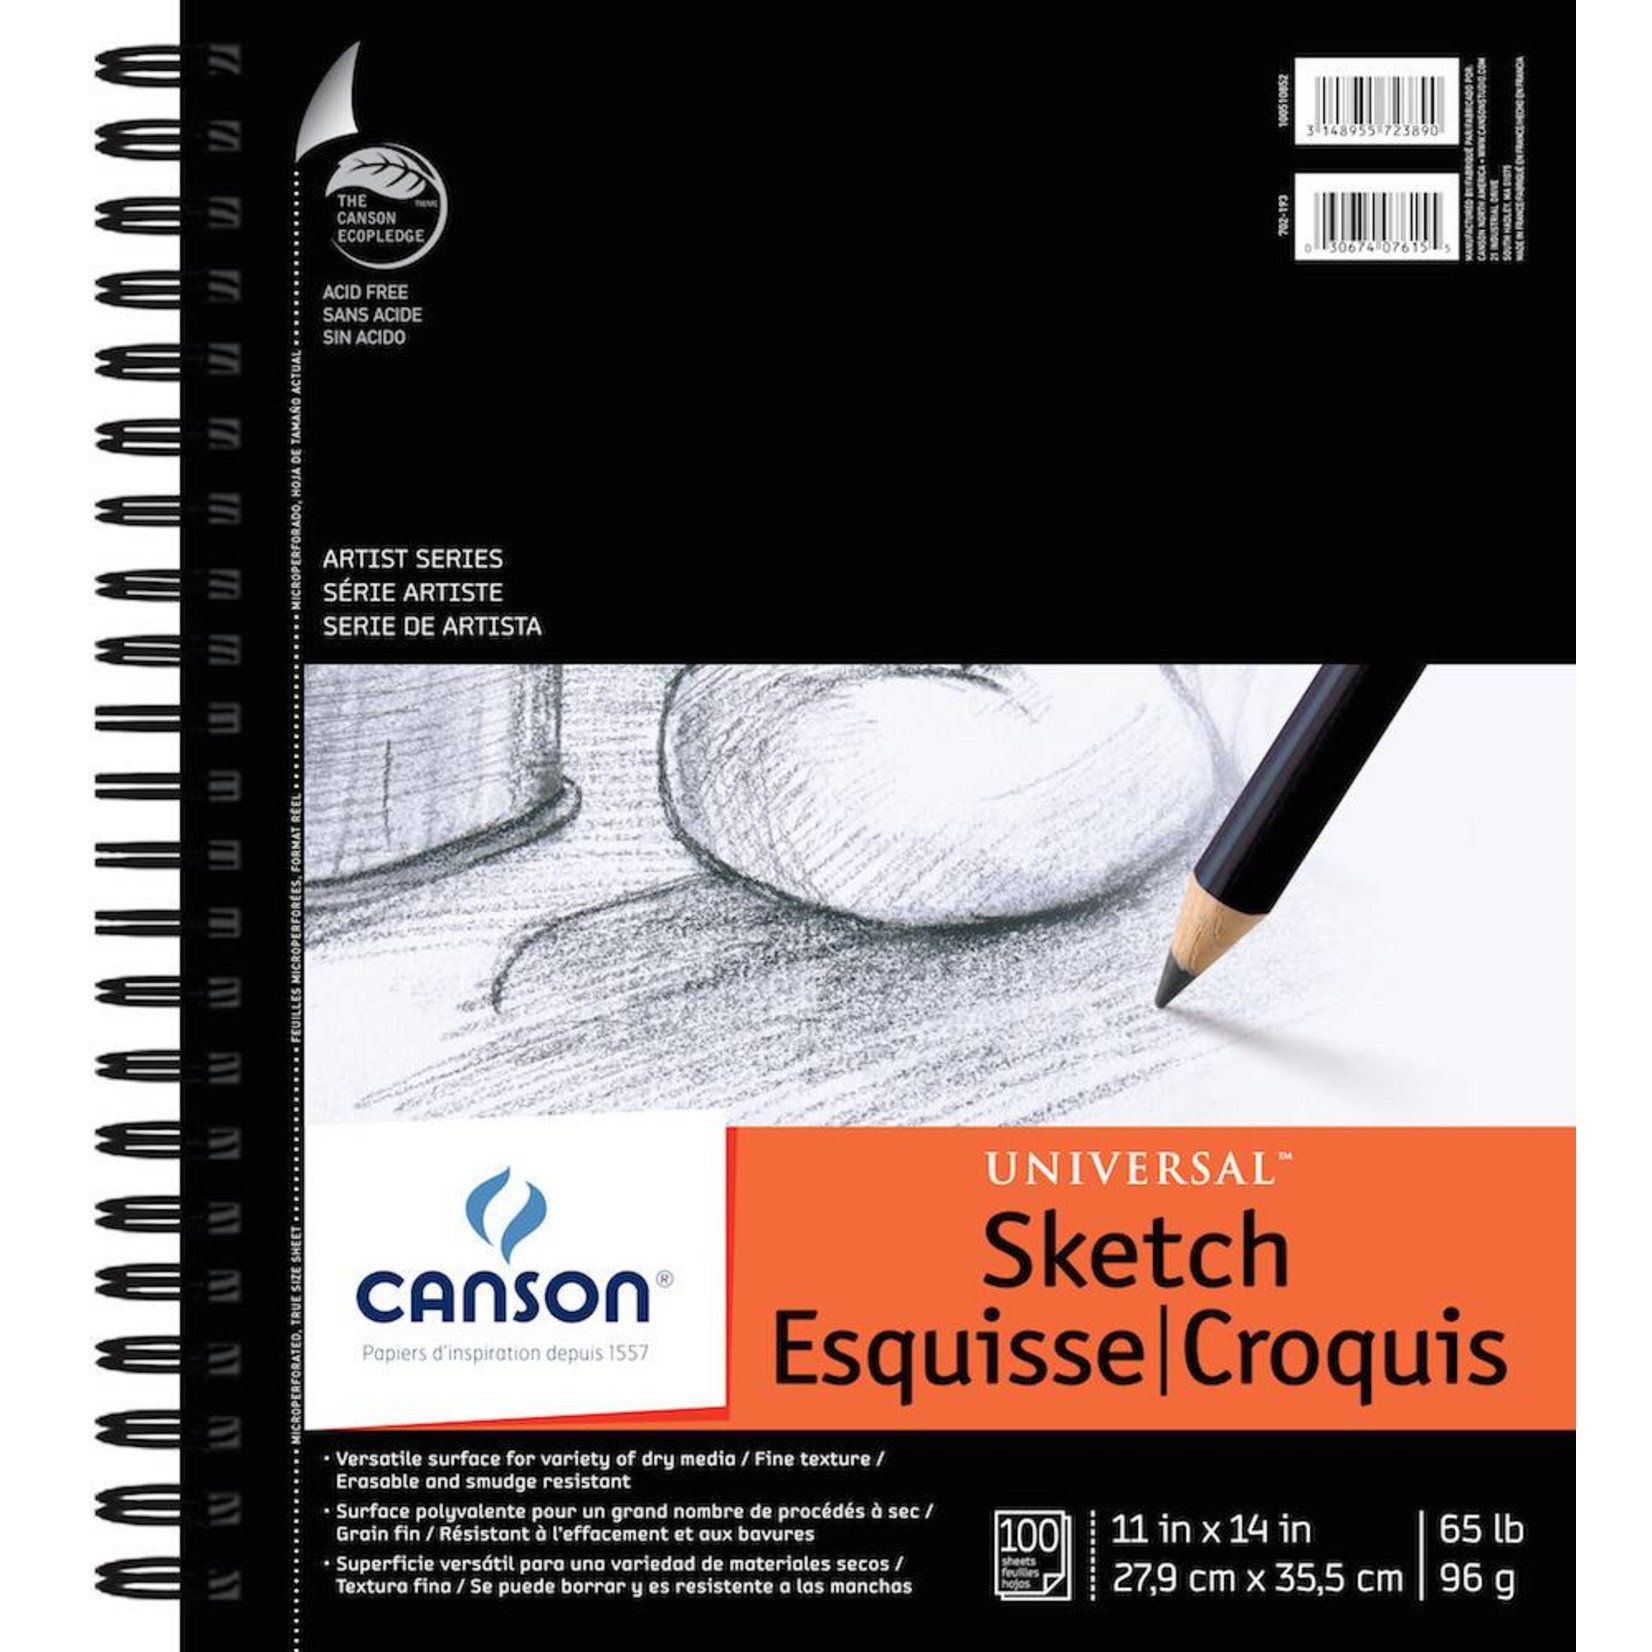 CANSON CANSON ARTIST SERIES UNIVERSAL SKETCH